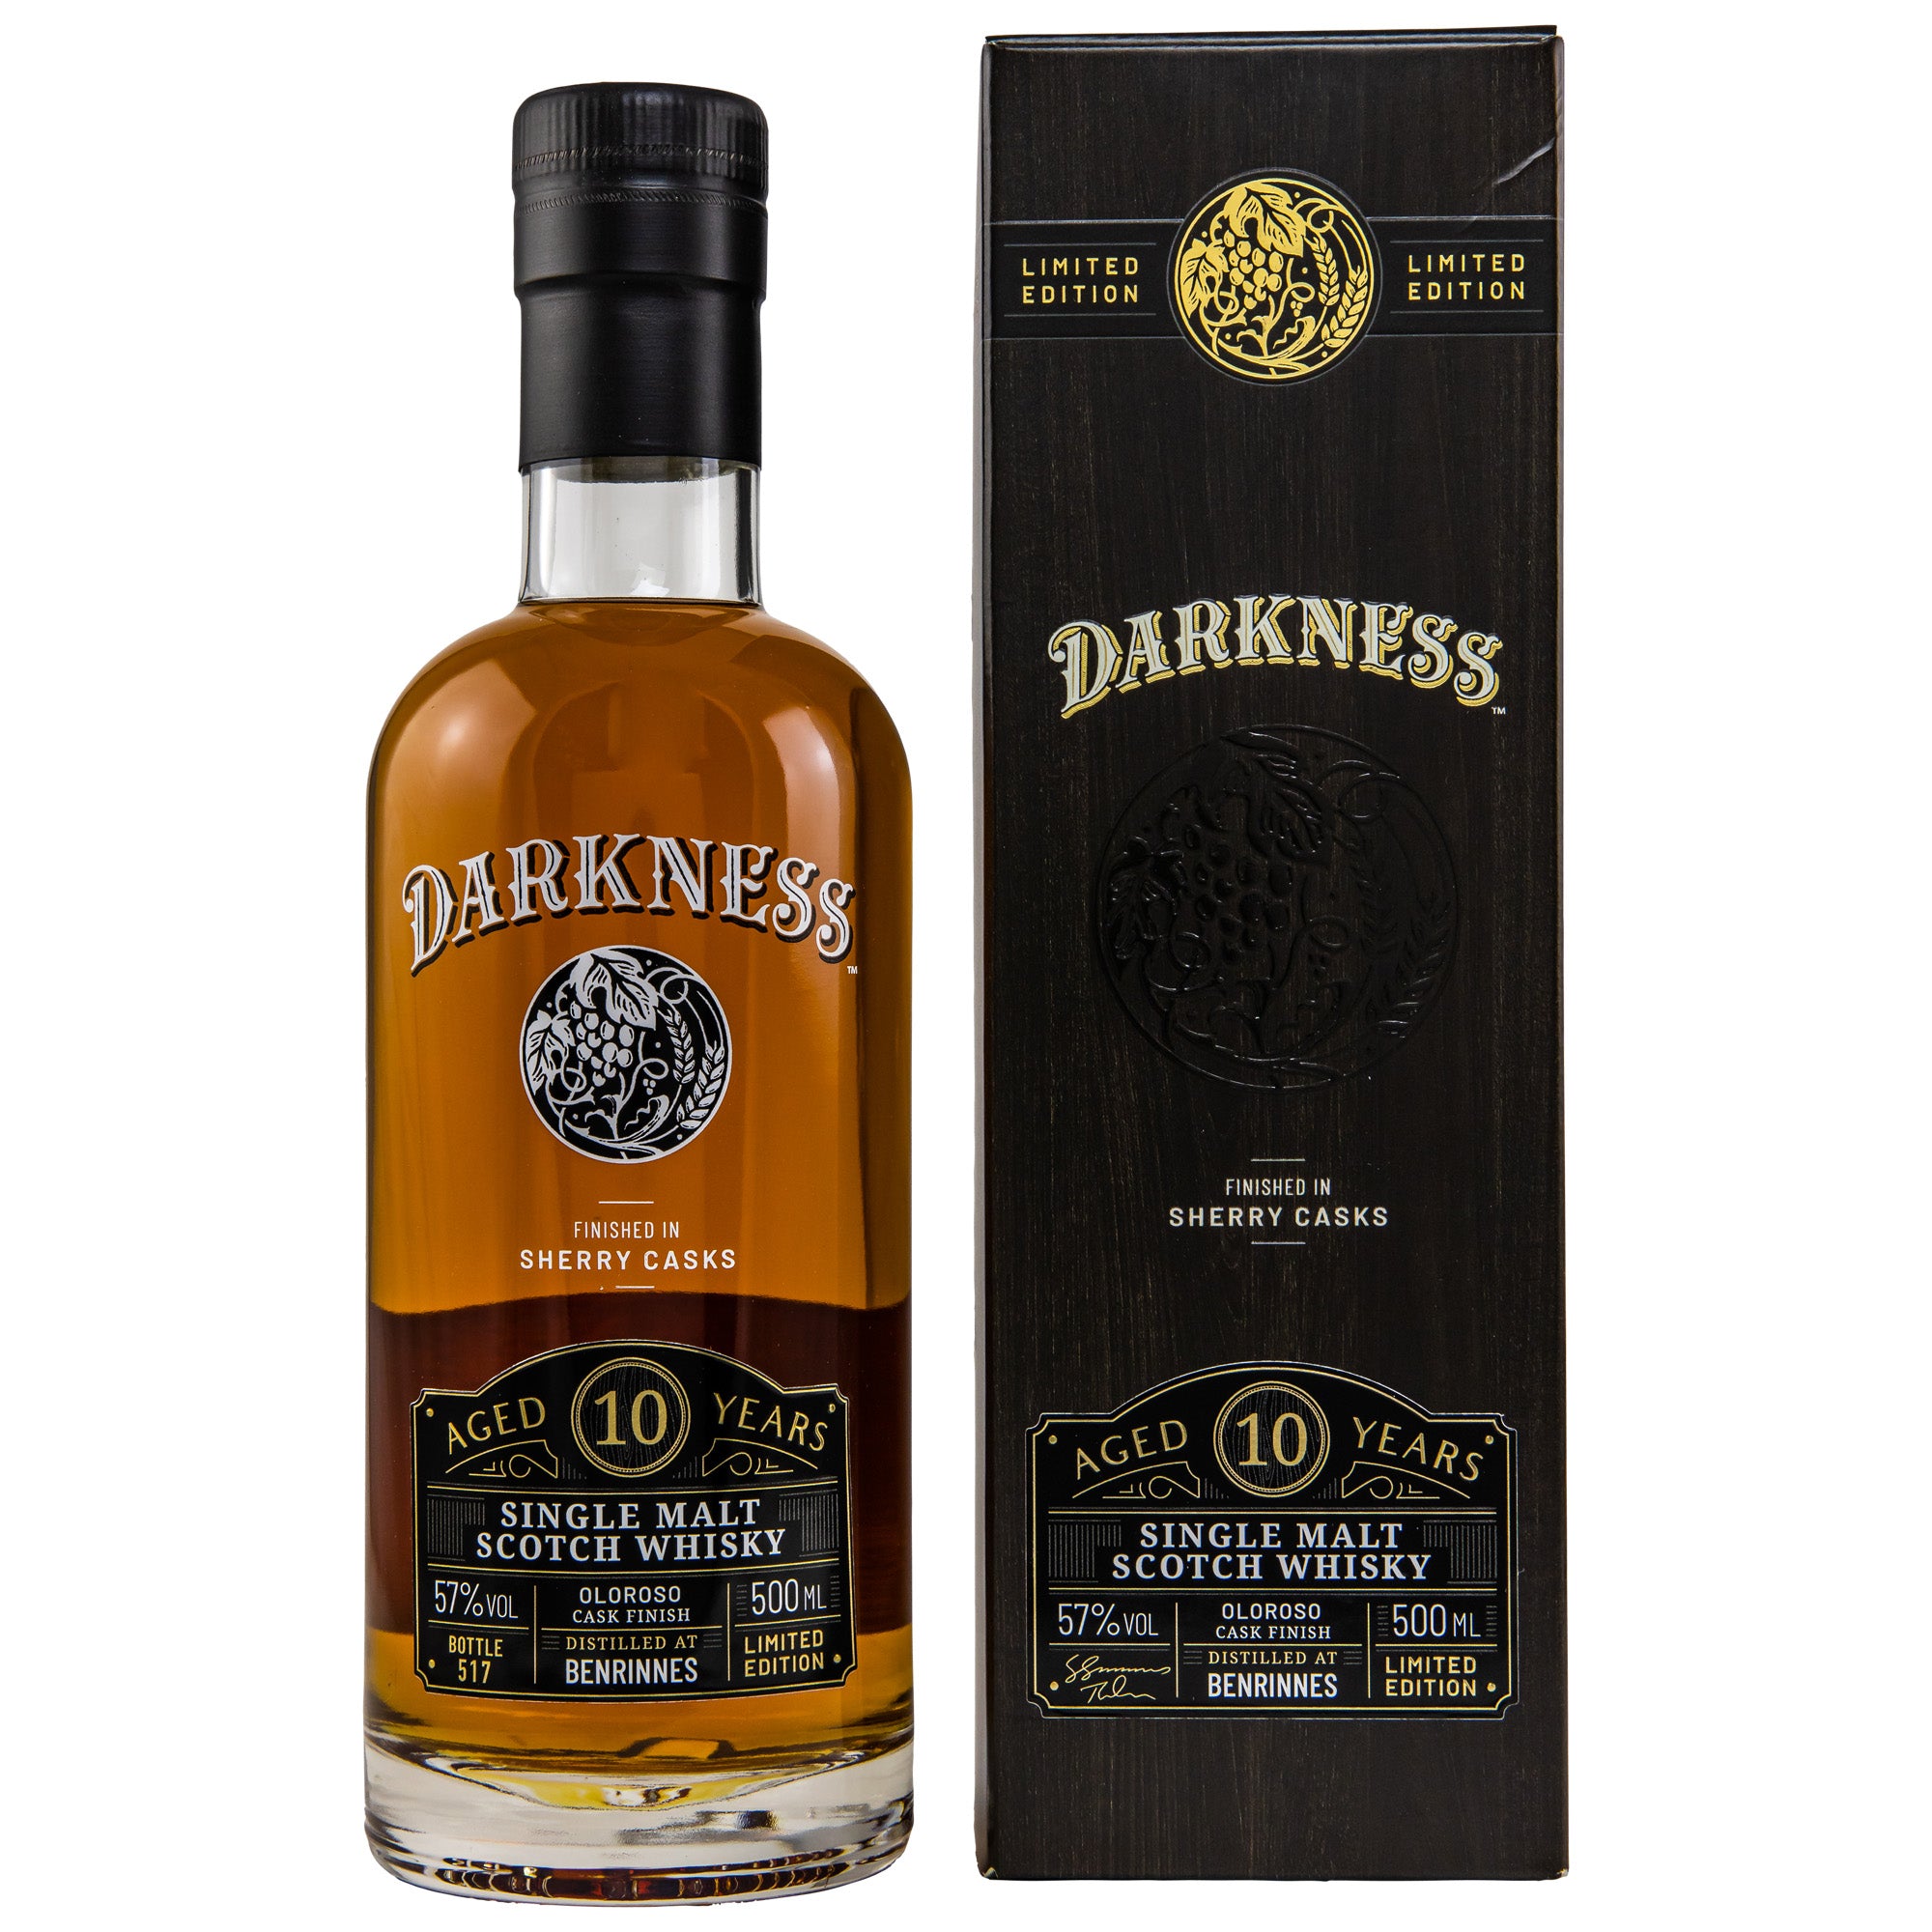 Darkness BENRINNES 10 Years Old OLOROSO CASK FINISH 57% Vol. 0,5l in Giftbox